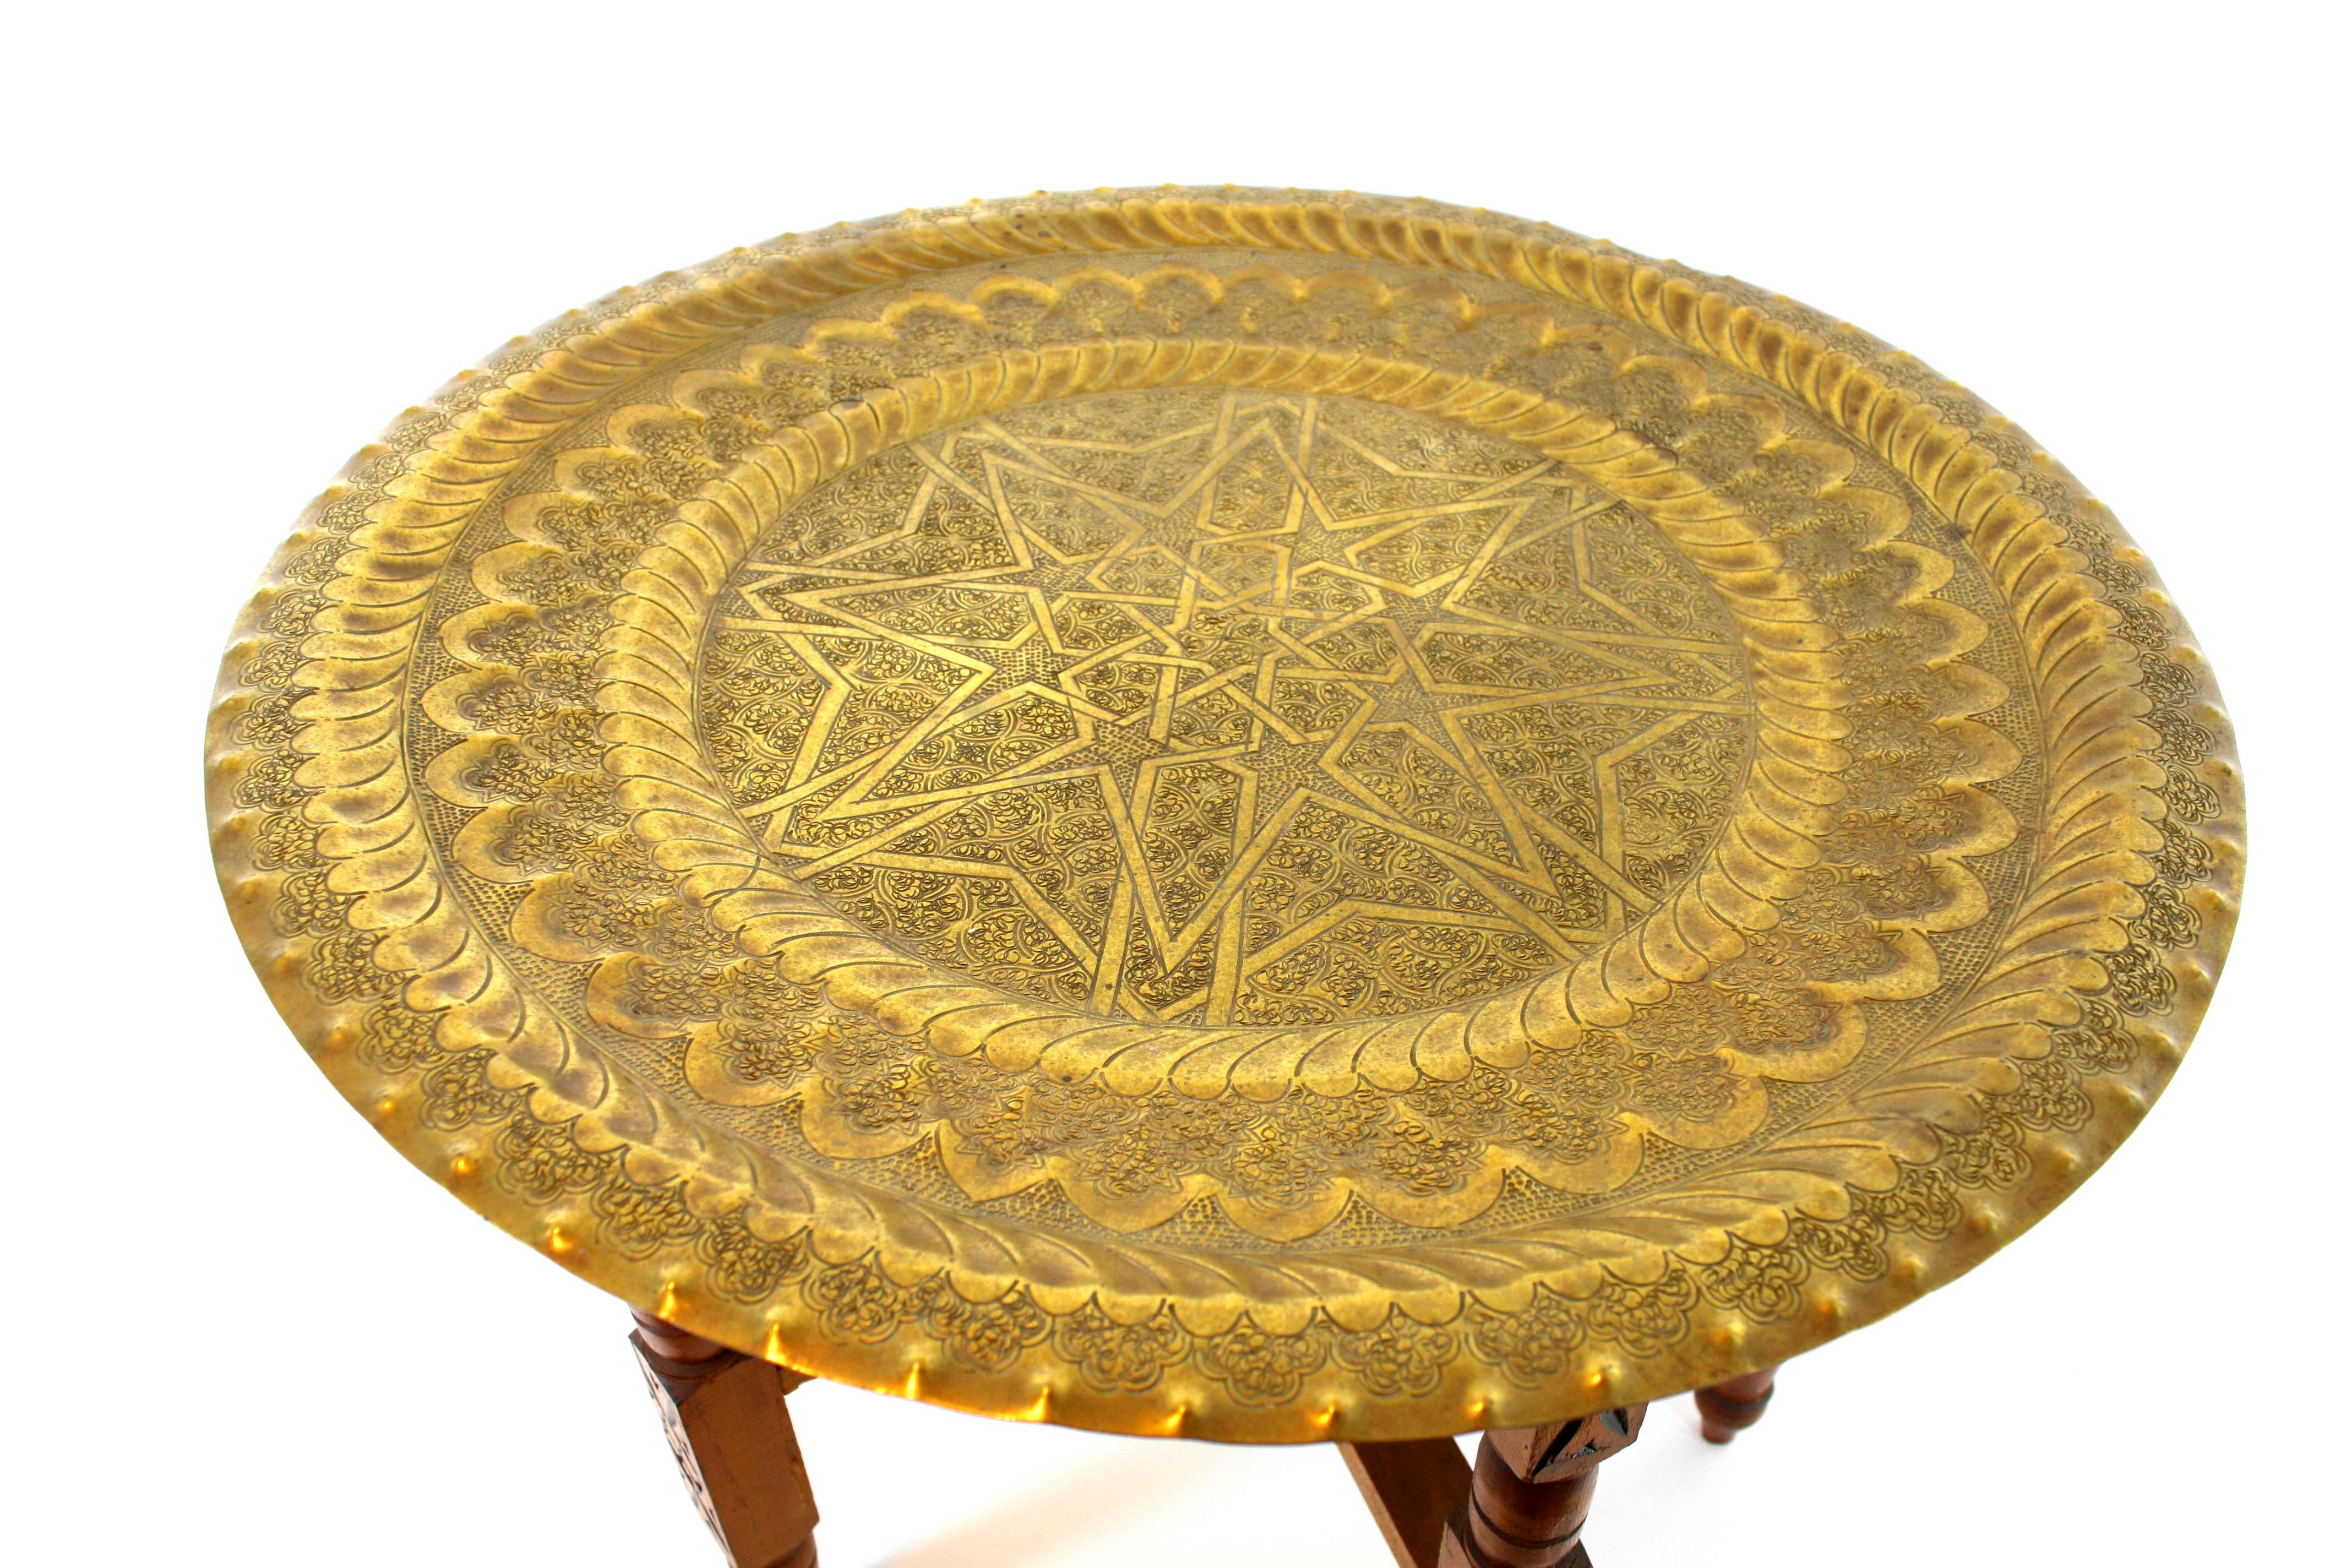 Large Traditional Moroccan Folding Tray Table, Brass, Wood, Morocco, 1940s-1950s.
This moorish brass tray table features a round brass tray with hand-hammered decorative details standing on a hand carved wood folding base.
To be used as coffee / tea